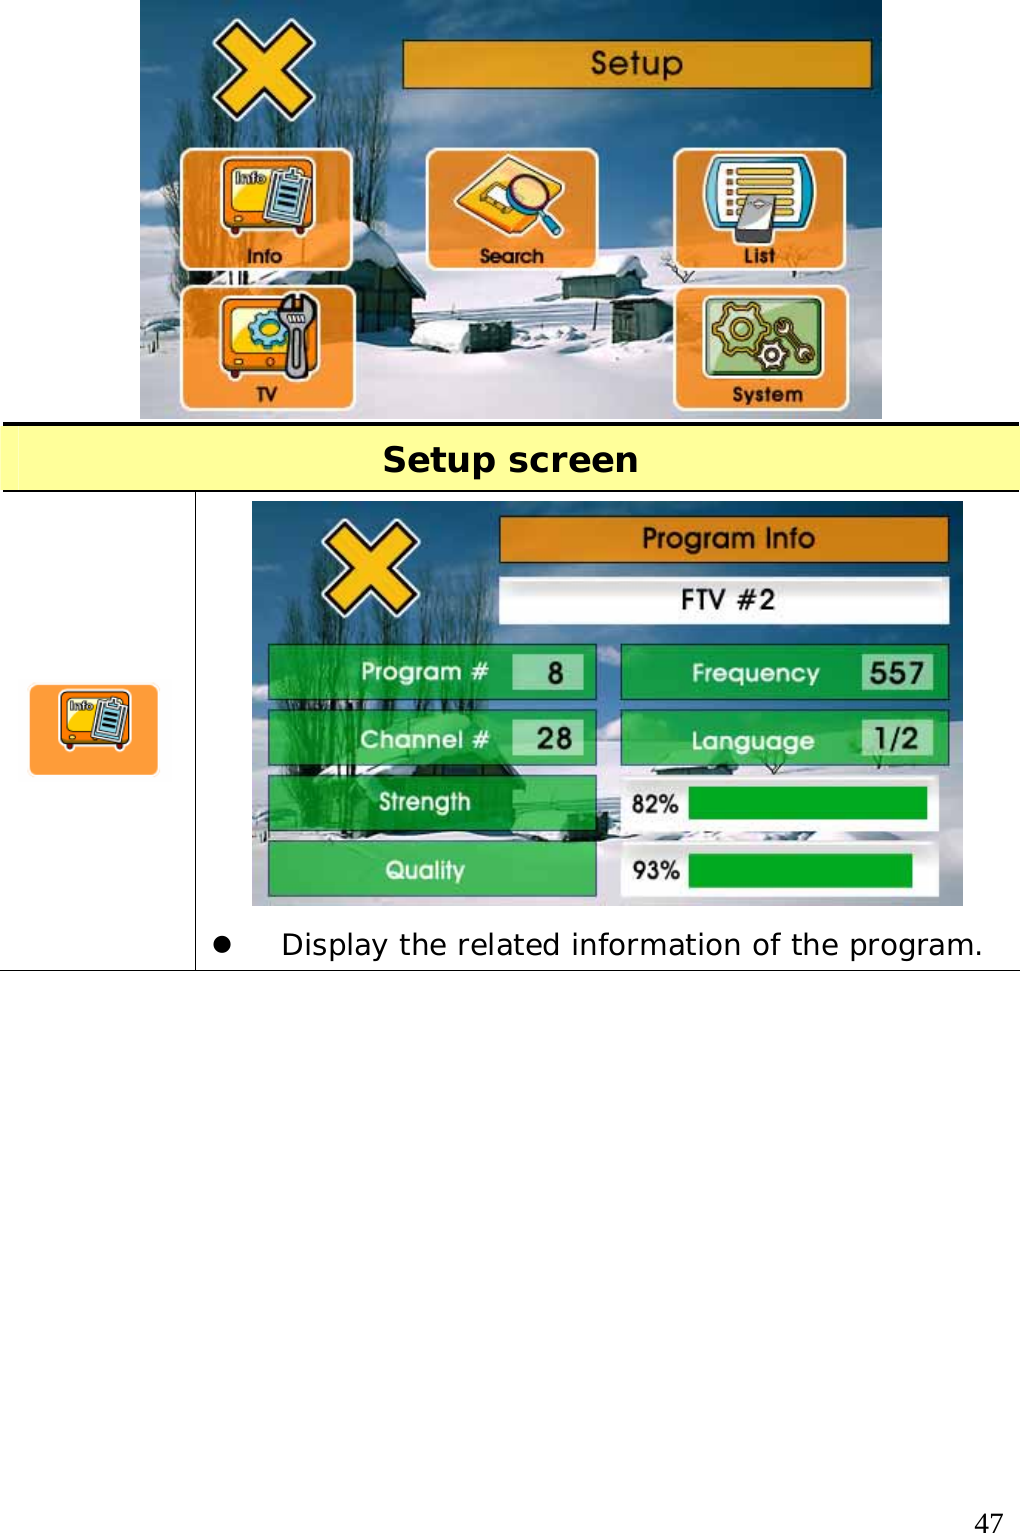  47  Setup screen   z Display the related information of the program. 